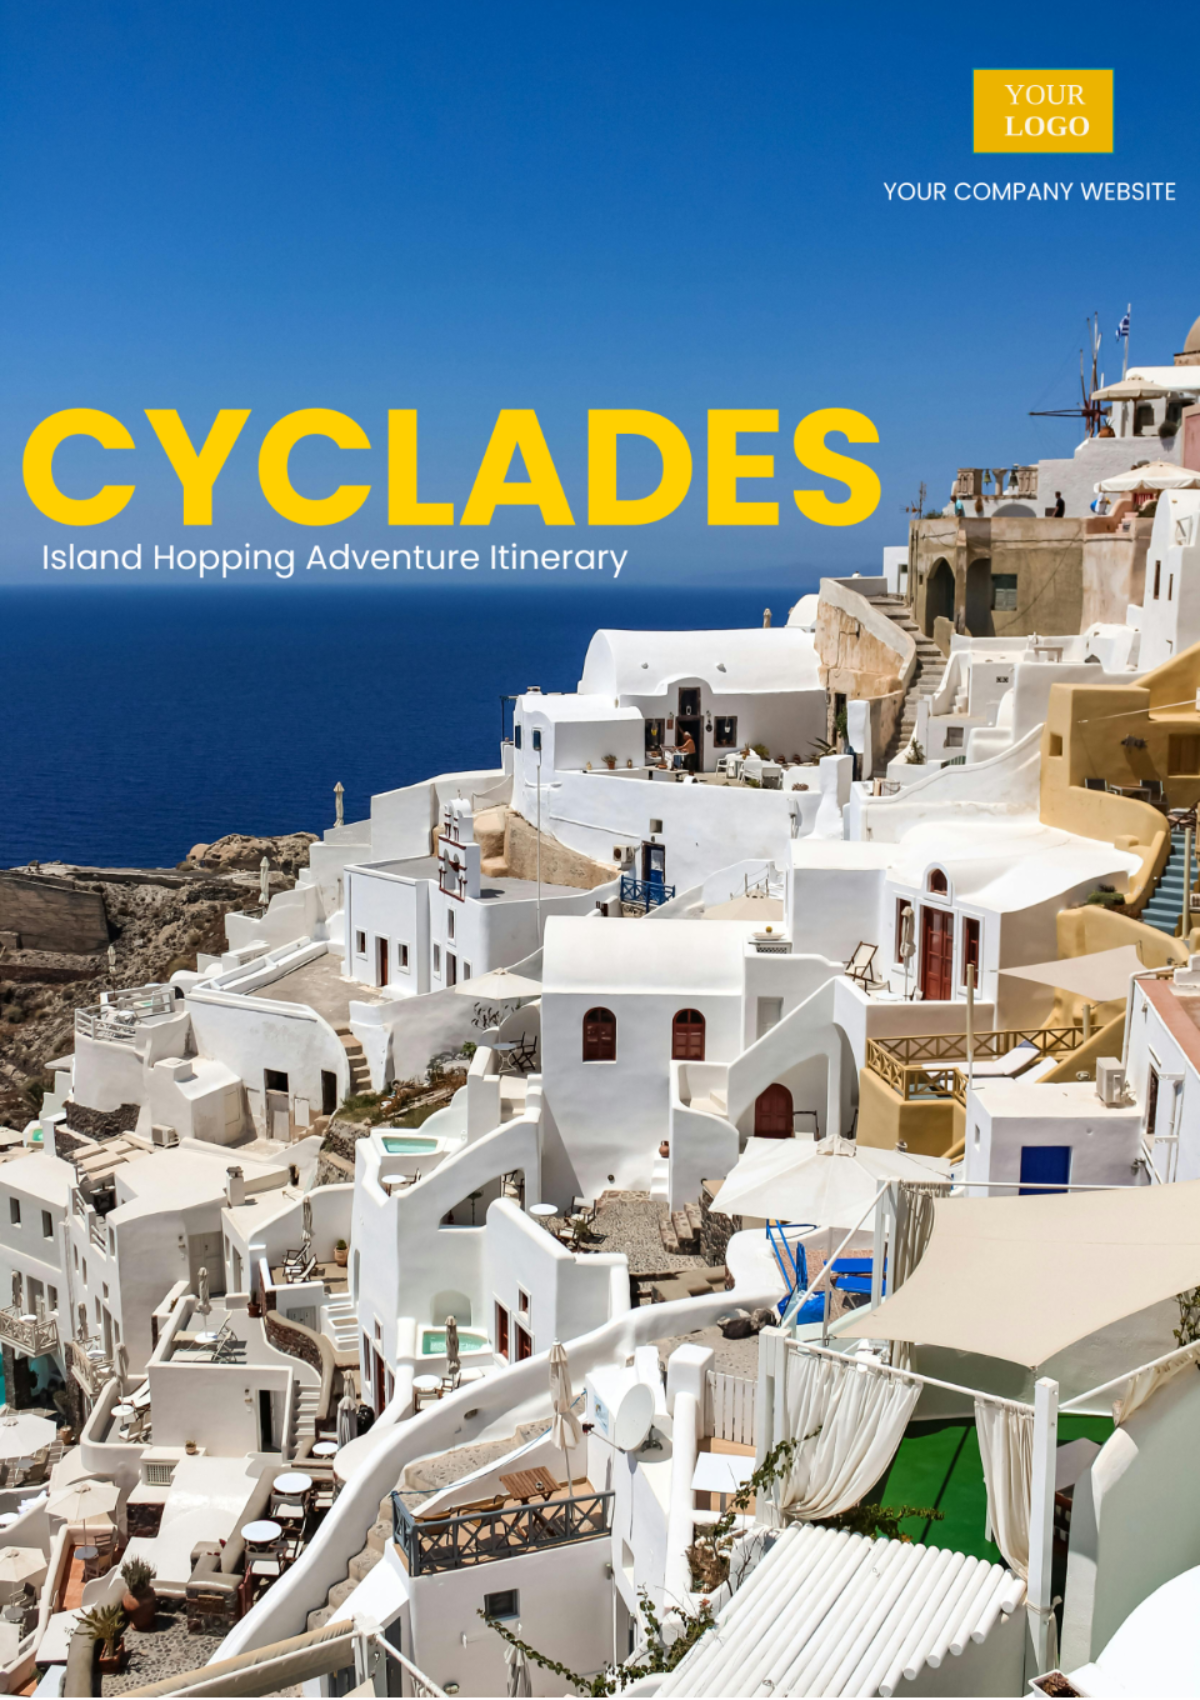 Free Cyclades Island Hopping Itinerary Template